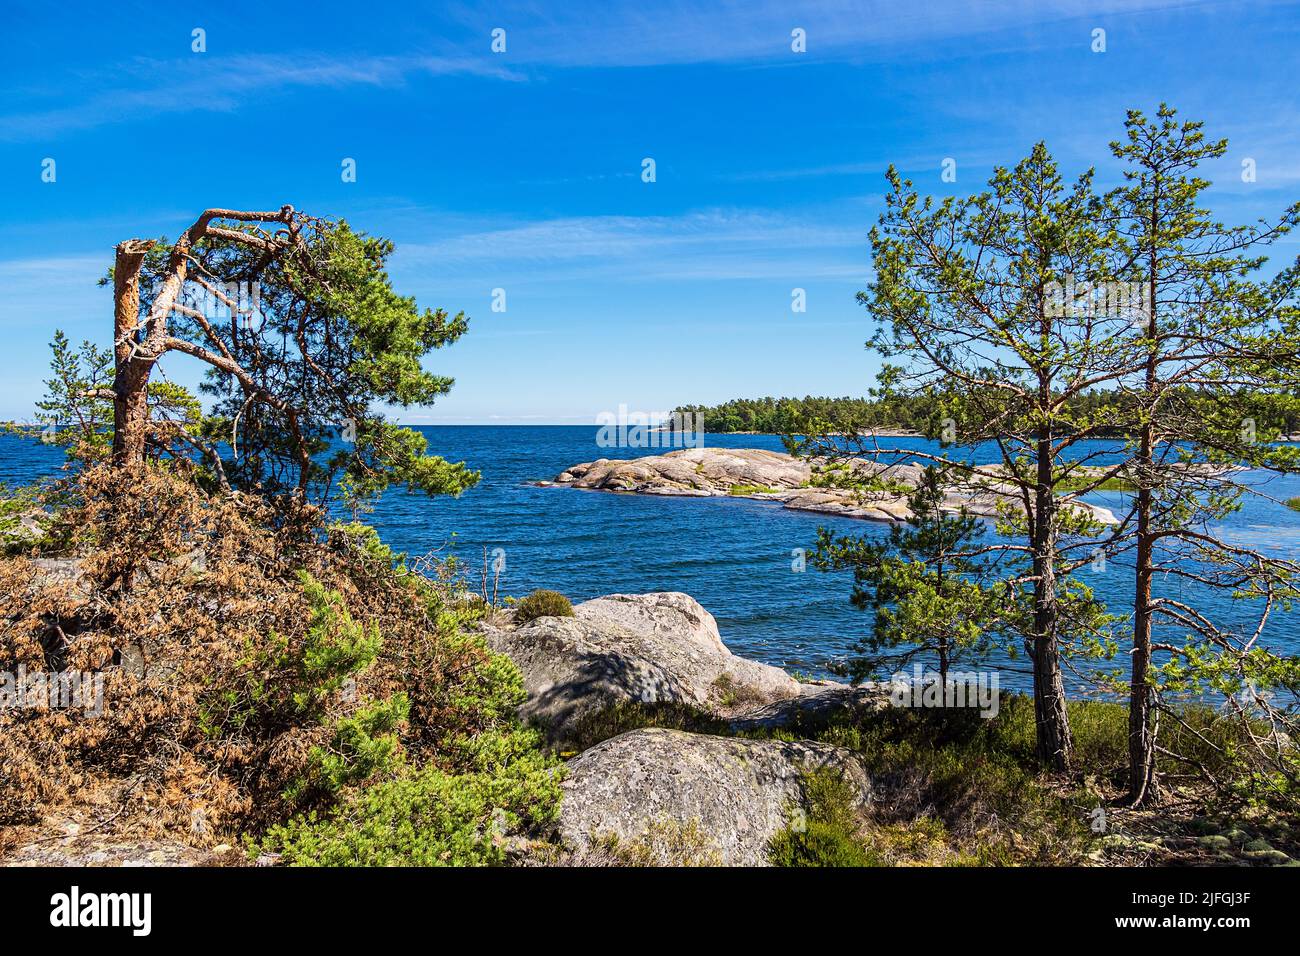 Landscape with rocks and trees on the island Hasselö in Sweden. Stock Photo